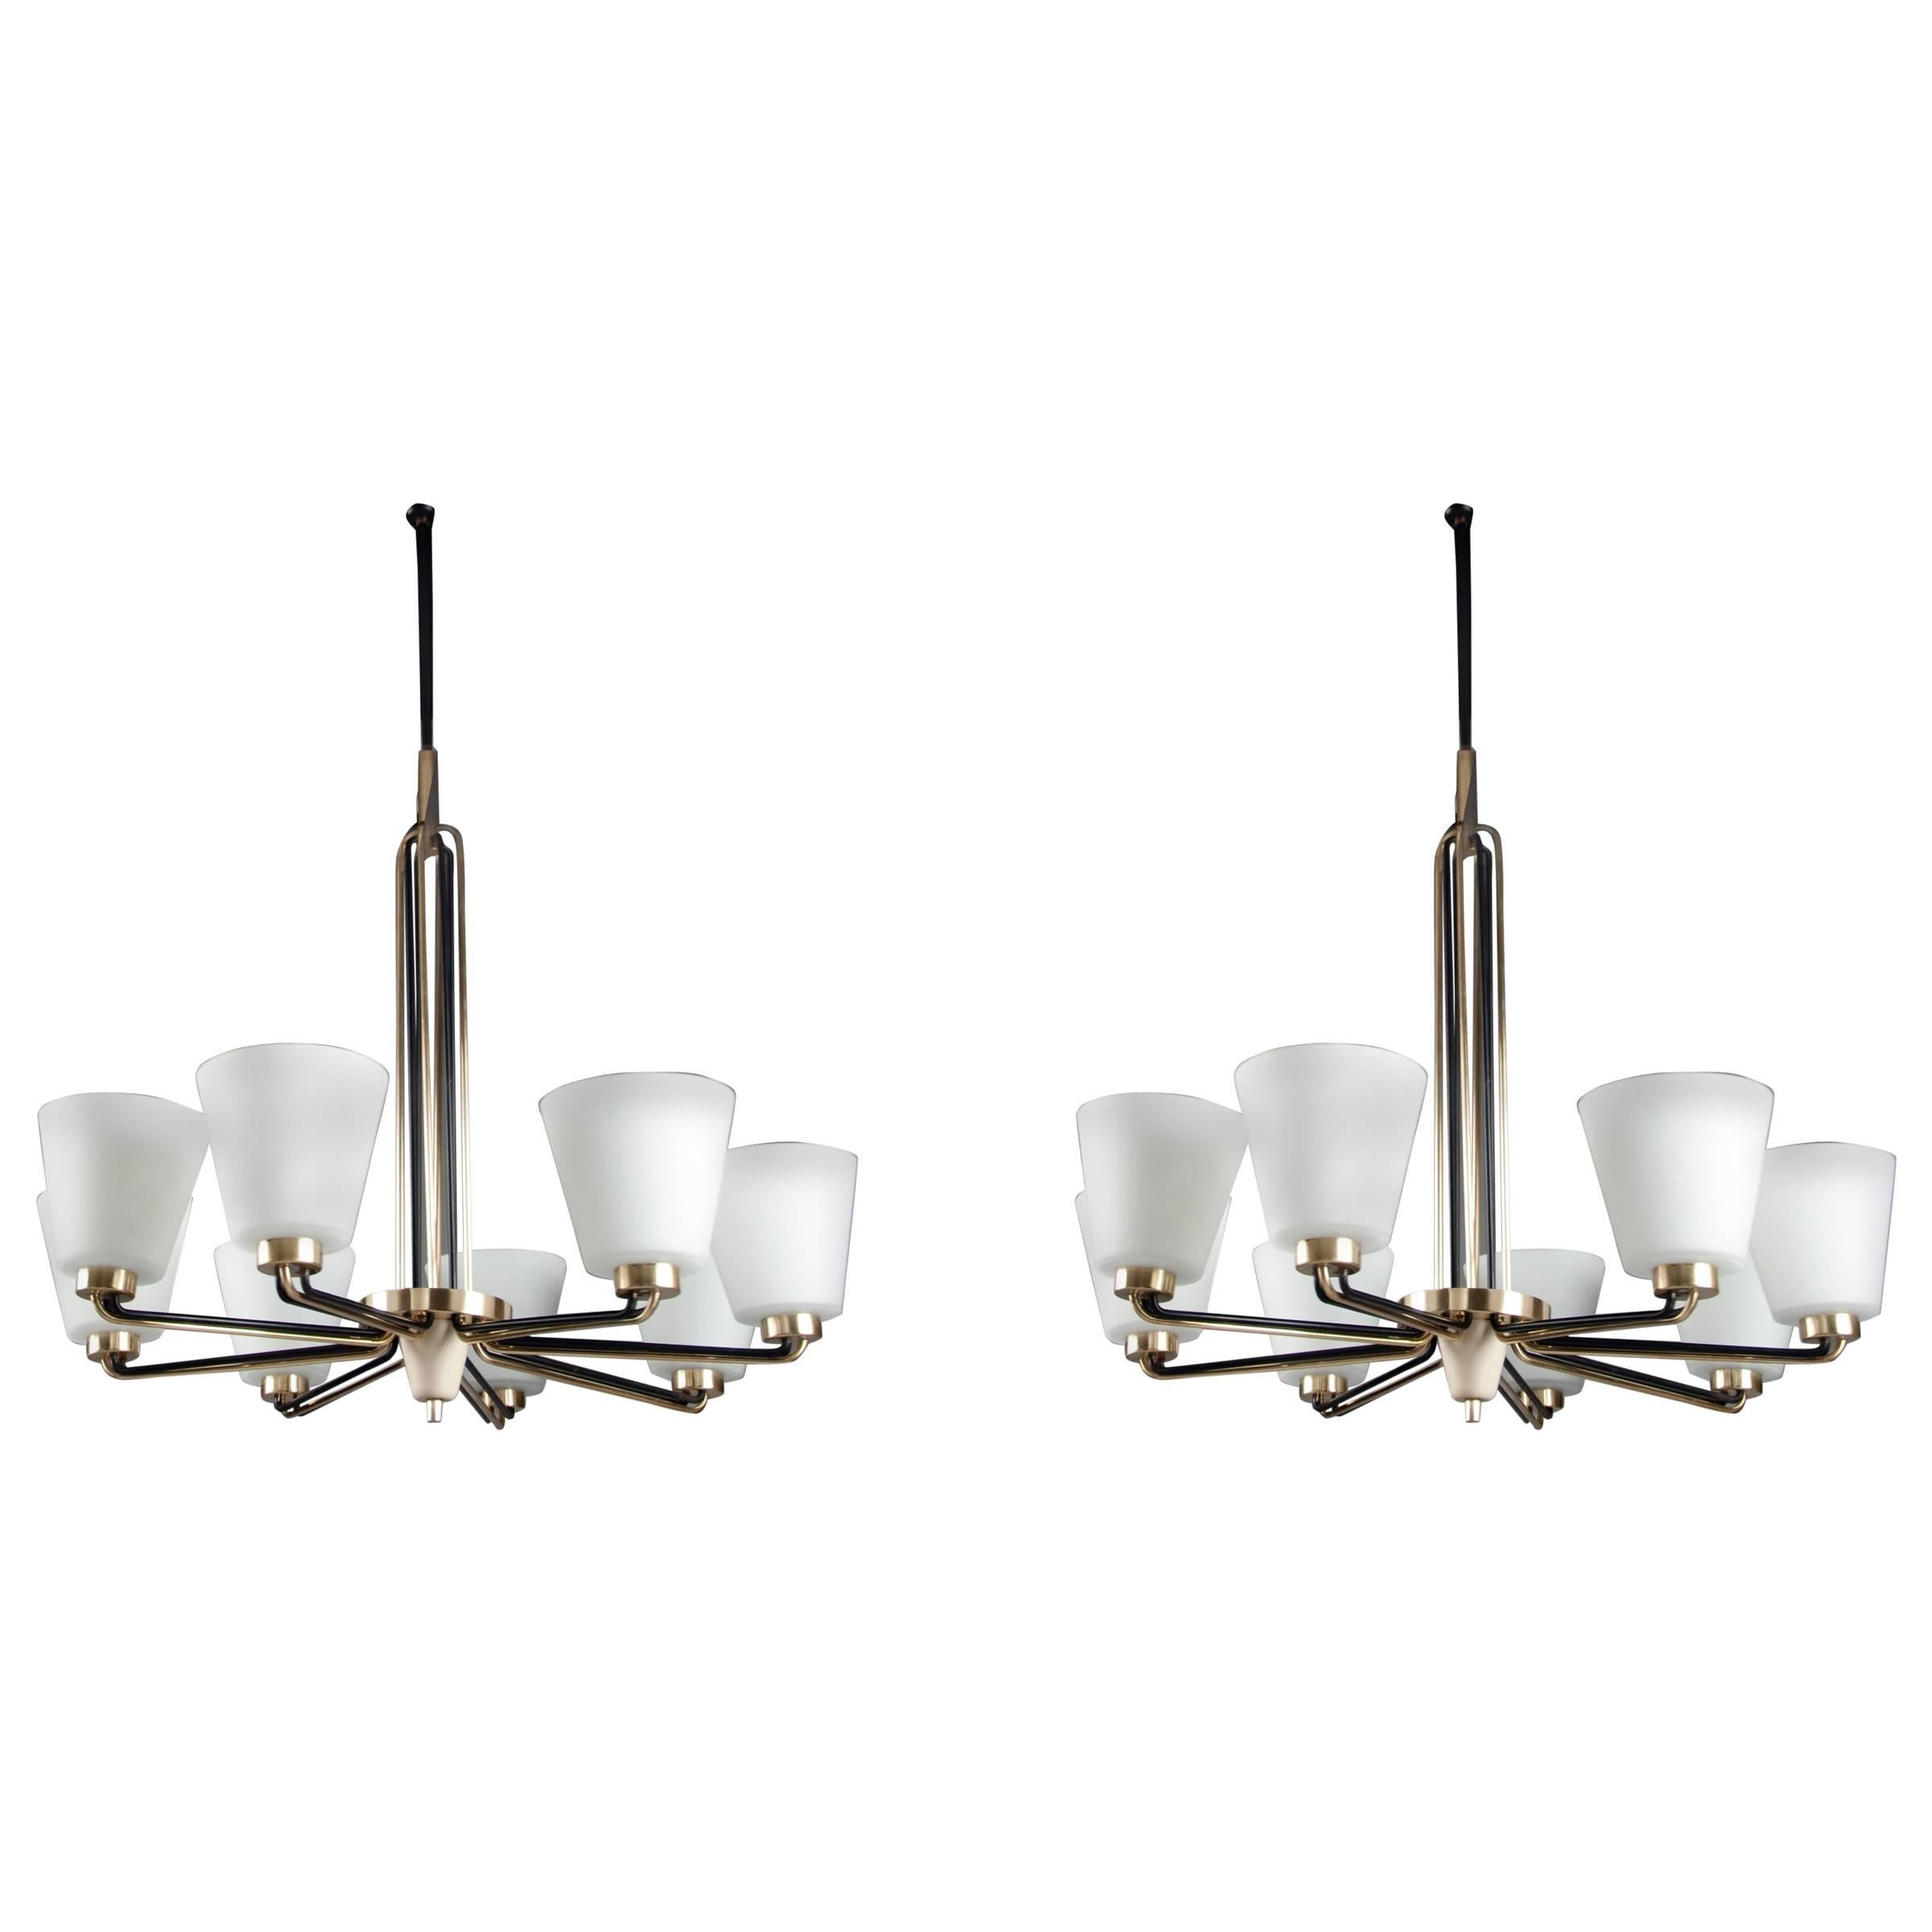 Pair of Chandeliers by Stilnovo Italy, 1950s